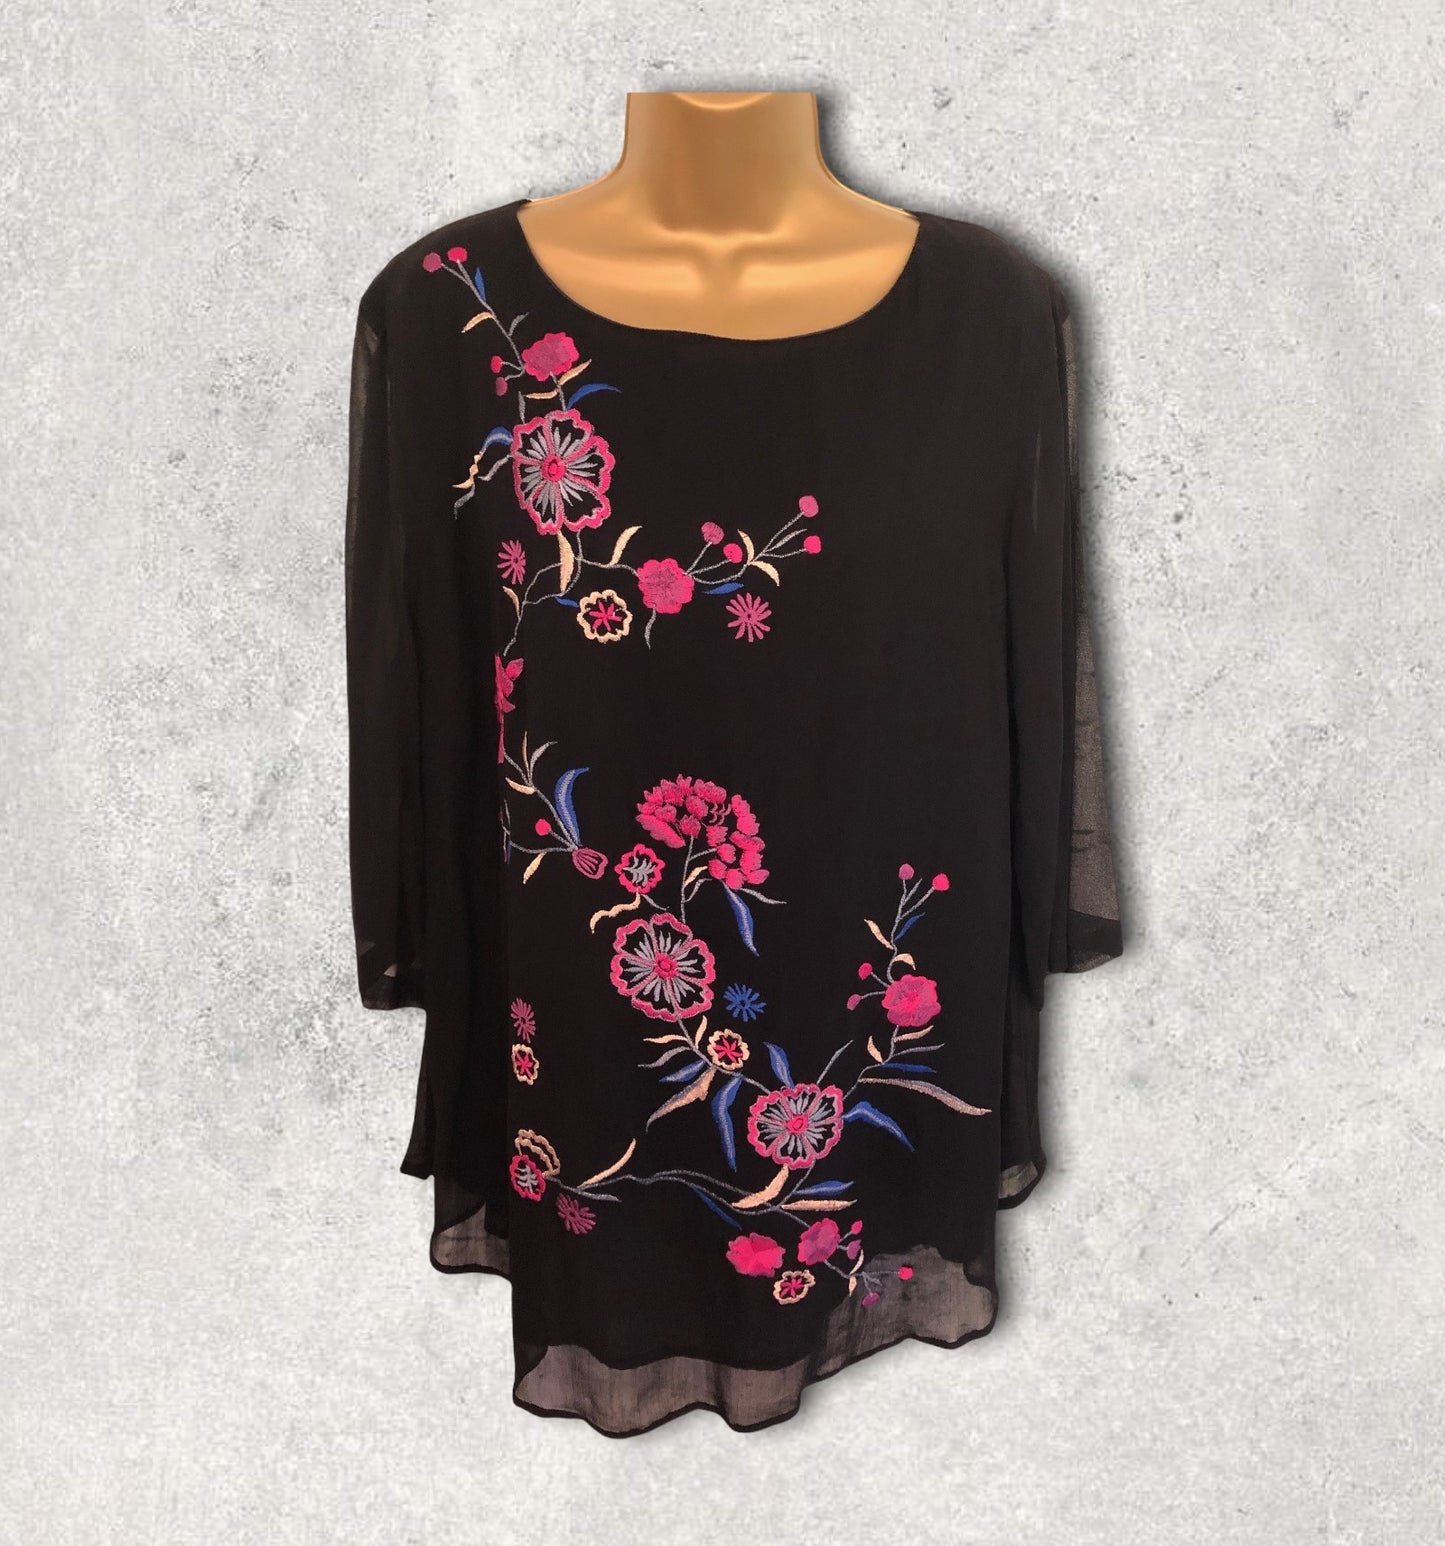 Pomodoro Black Chiffon Embroidered Floral Top UK 18 US 14 EU 46 RRP £59.95 Timeless Fashions